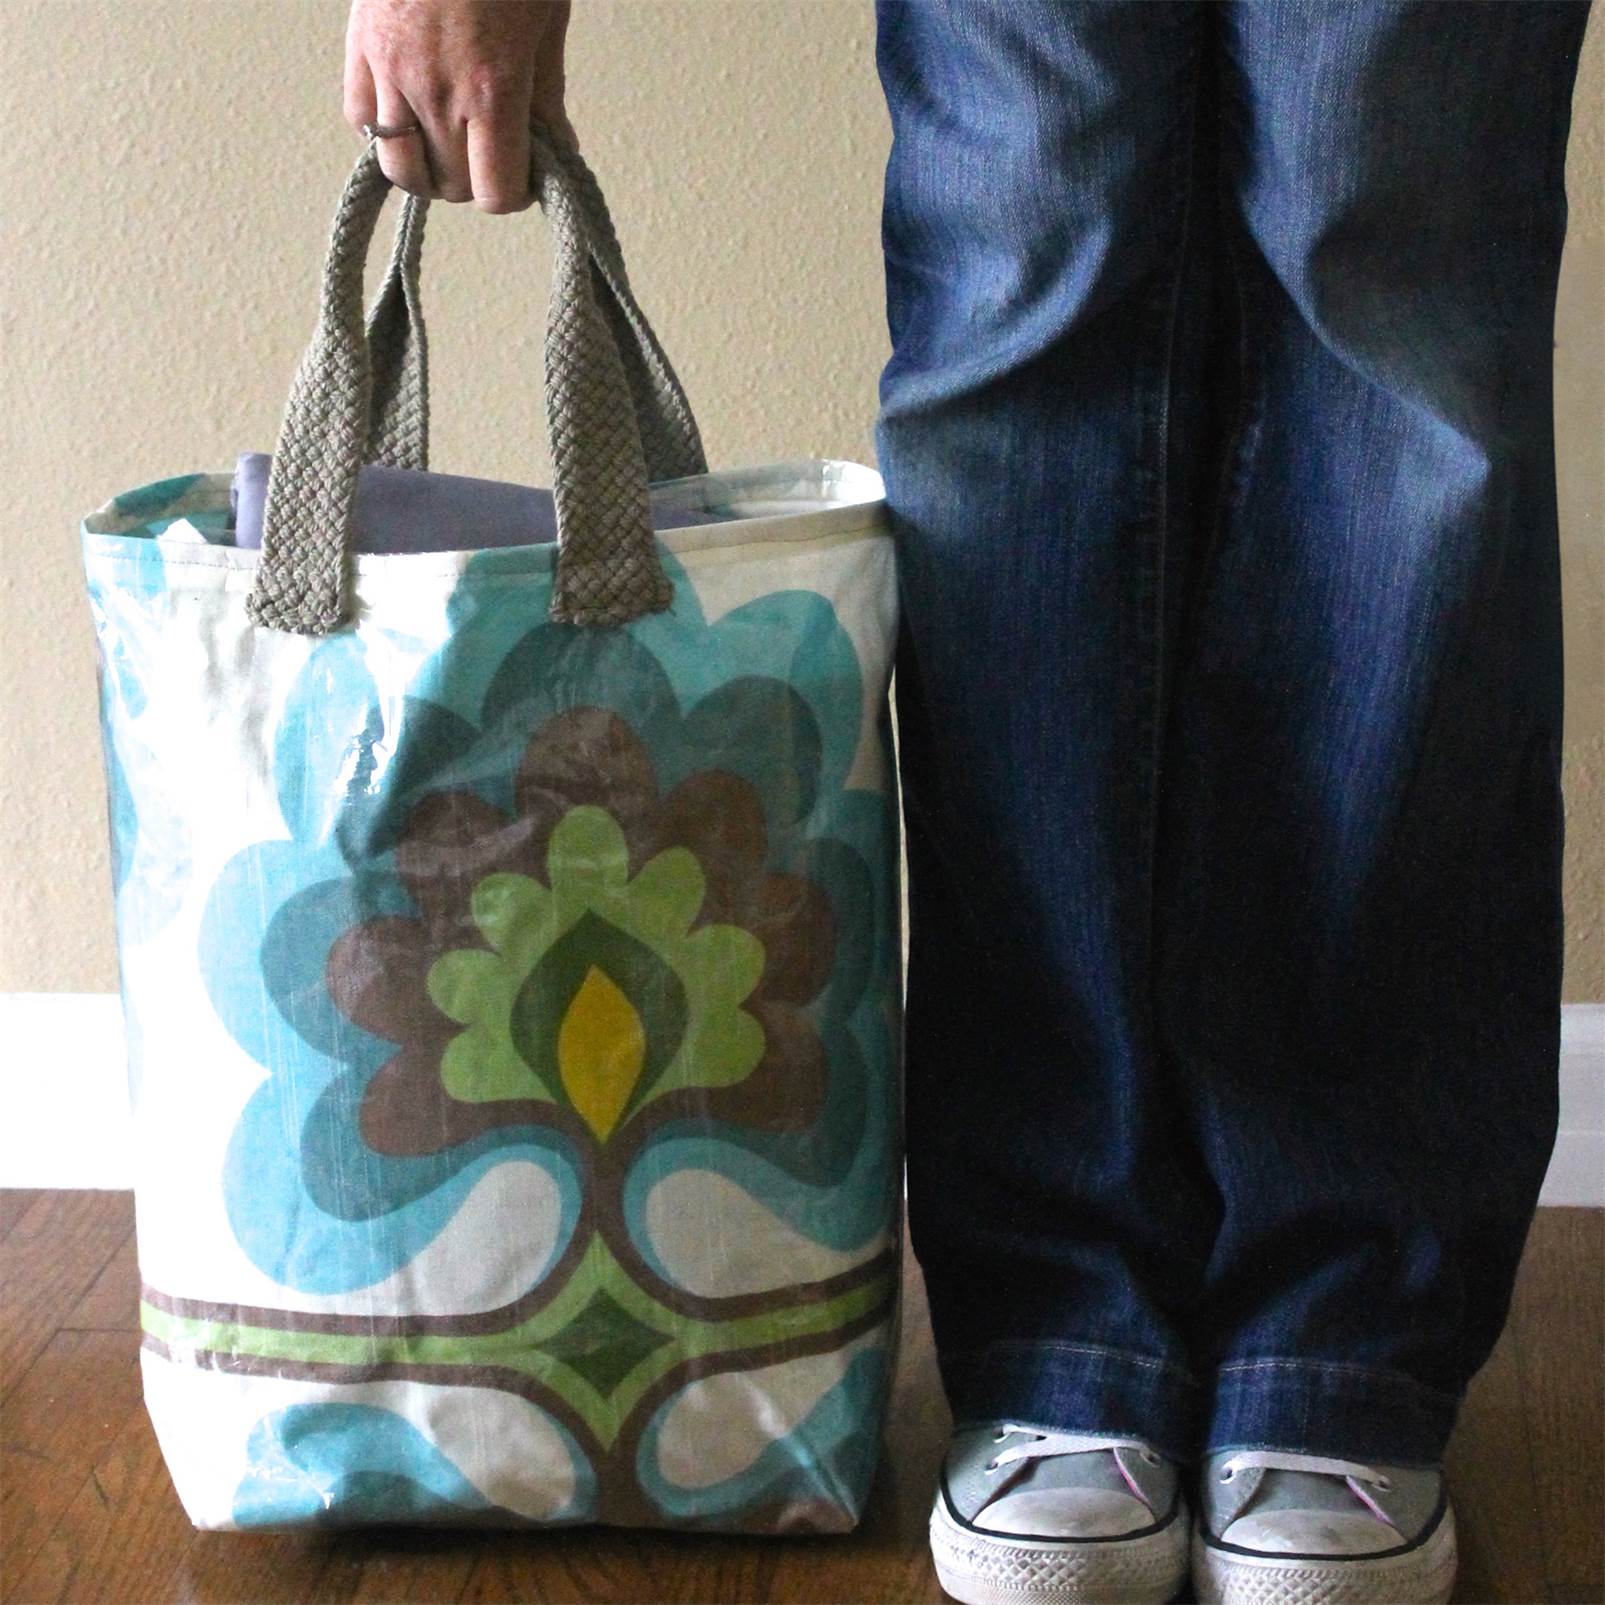 DIY: Tutorial on How To Make a 70's Style Tote Bag - Easy Sewing!